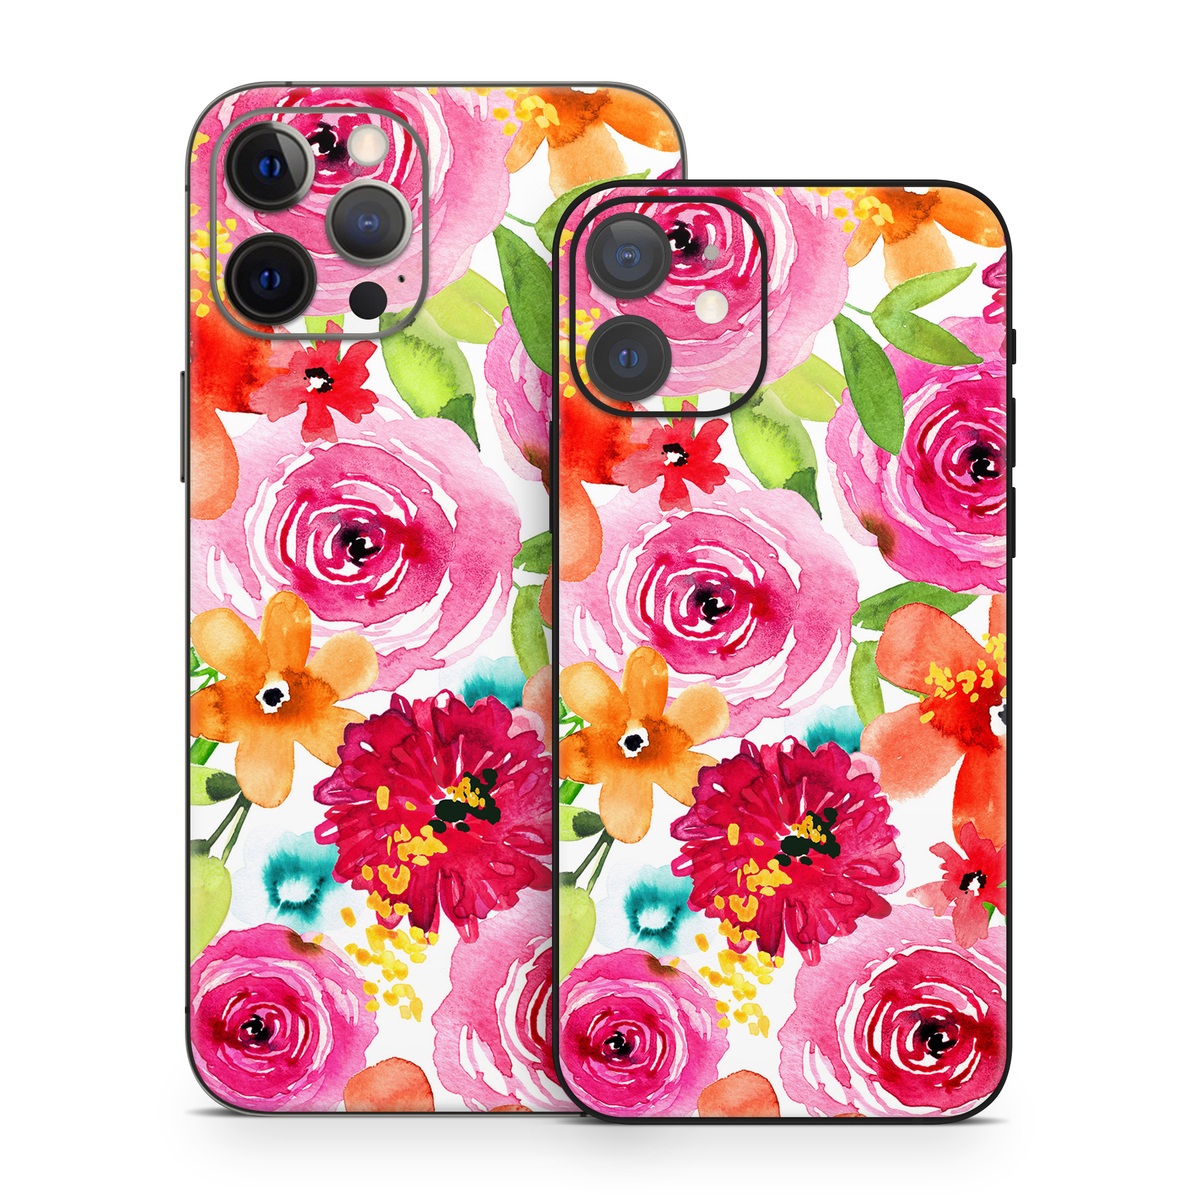 iPhone 12 Series Skin design of Flower, Cut flowers, Floral design, Plant, Pink, Bouquet, Petal, Flower Arranging, Artificial flower, Clip art, with pink, red, green, orange, yellow, blue, white colors